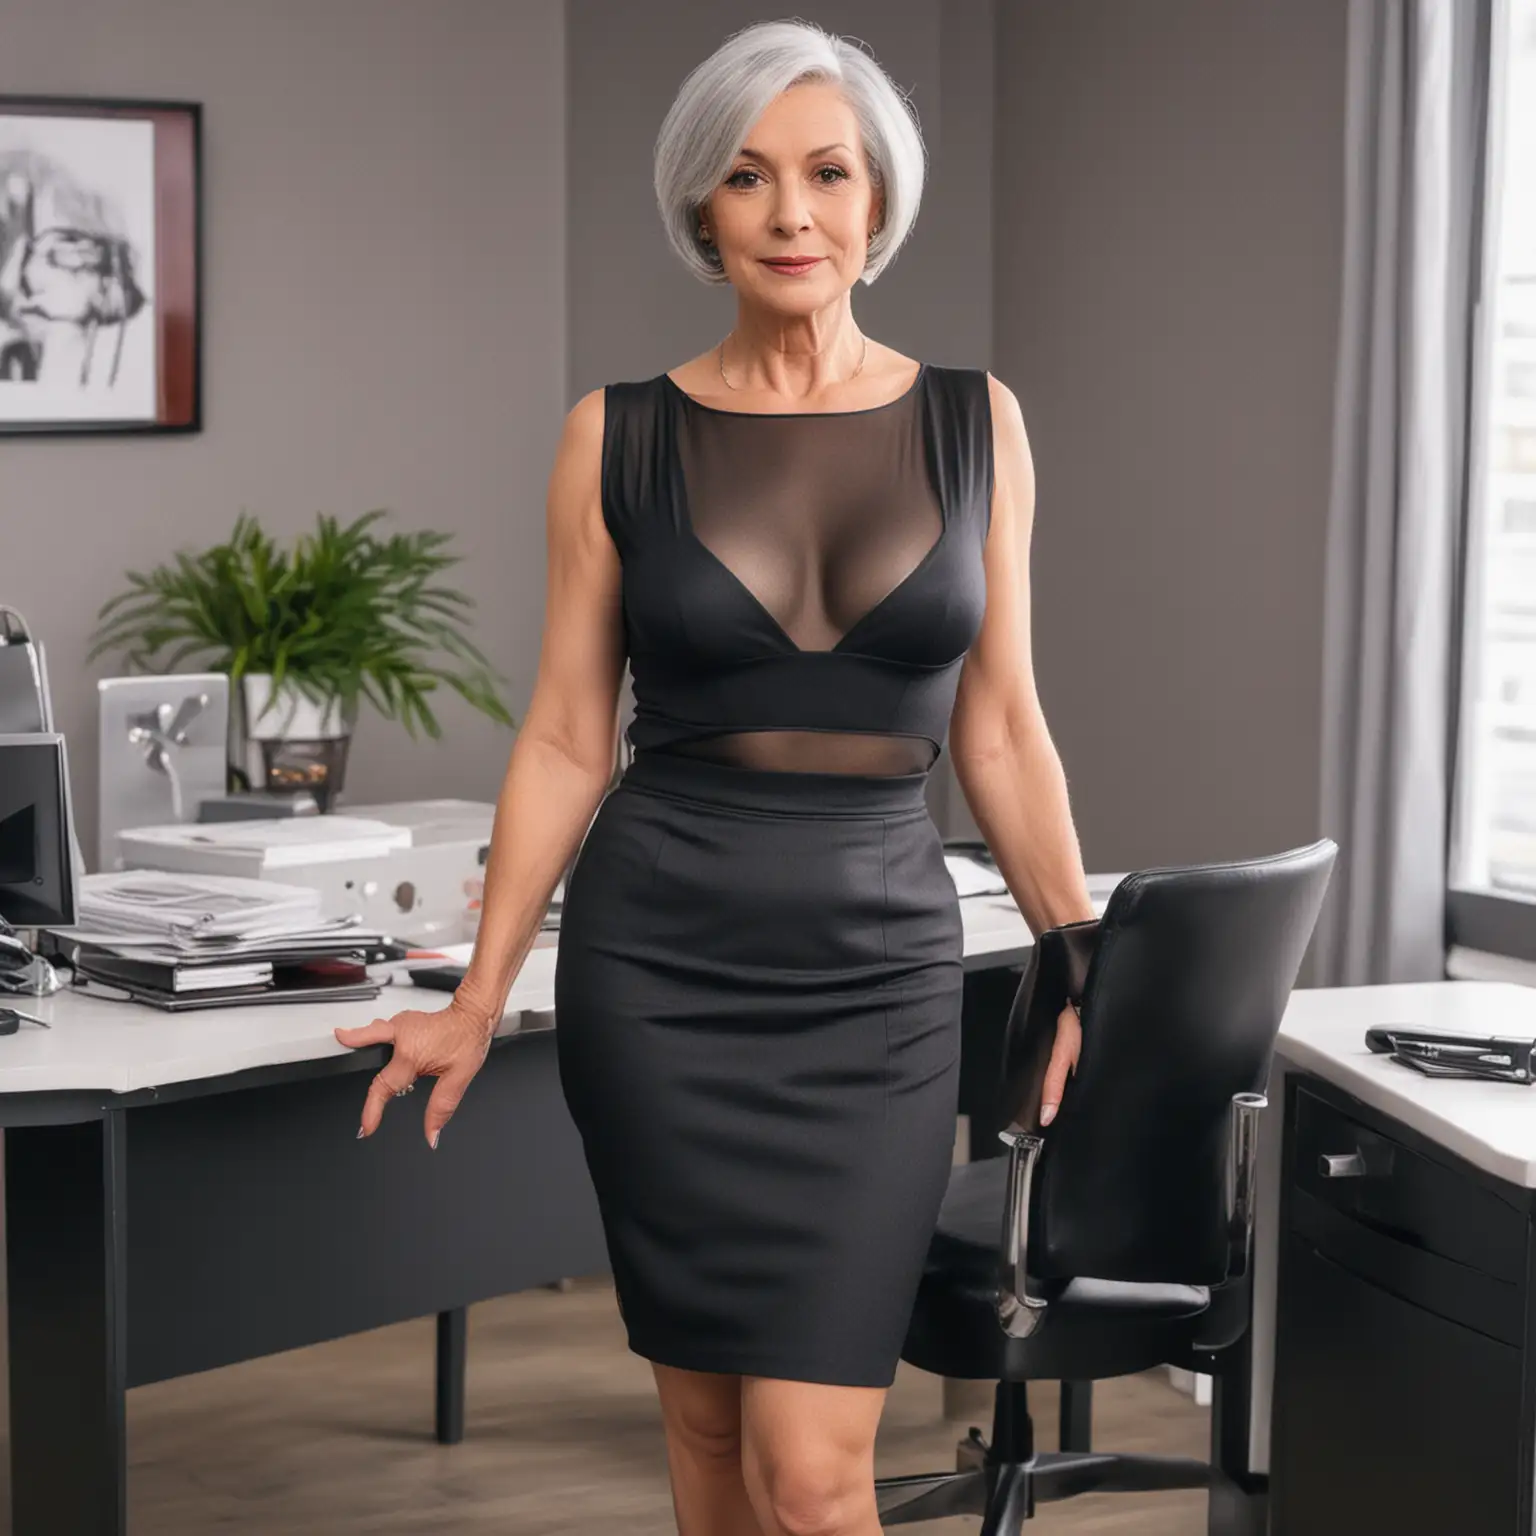 a full-length view of a slim beautiful 60-year old woman with grey hair in a bob and big breasts and hard nipples  and wearing a skintight pencil skirt and Louboutin stilettos in an office